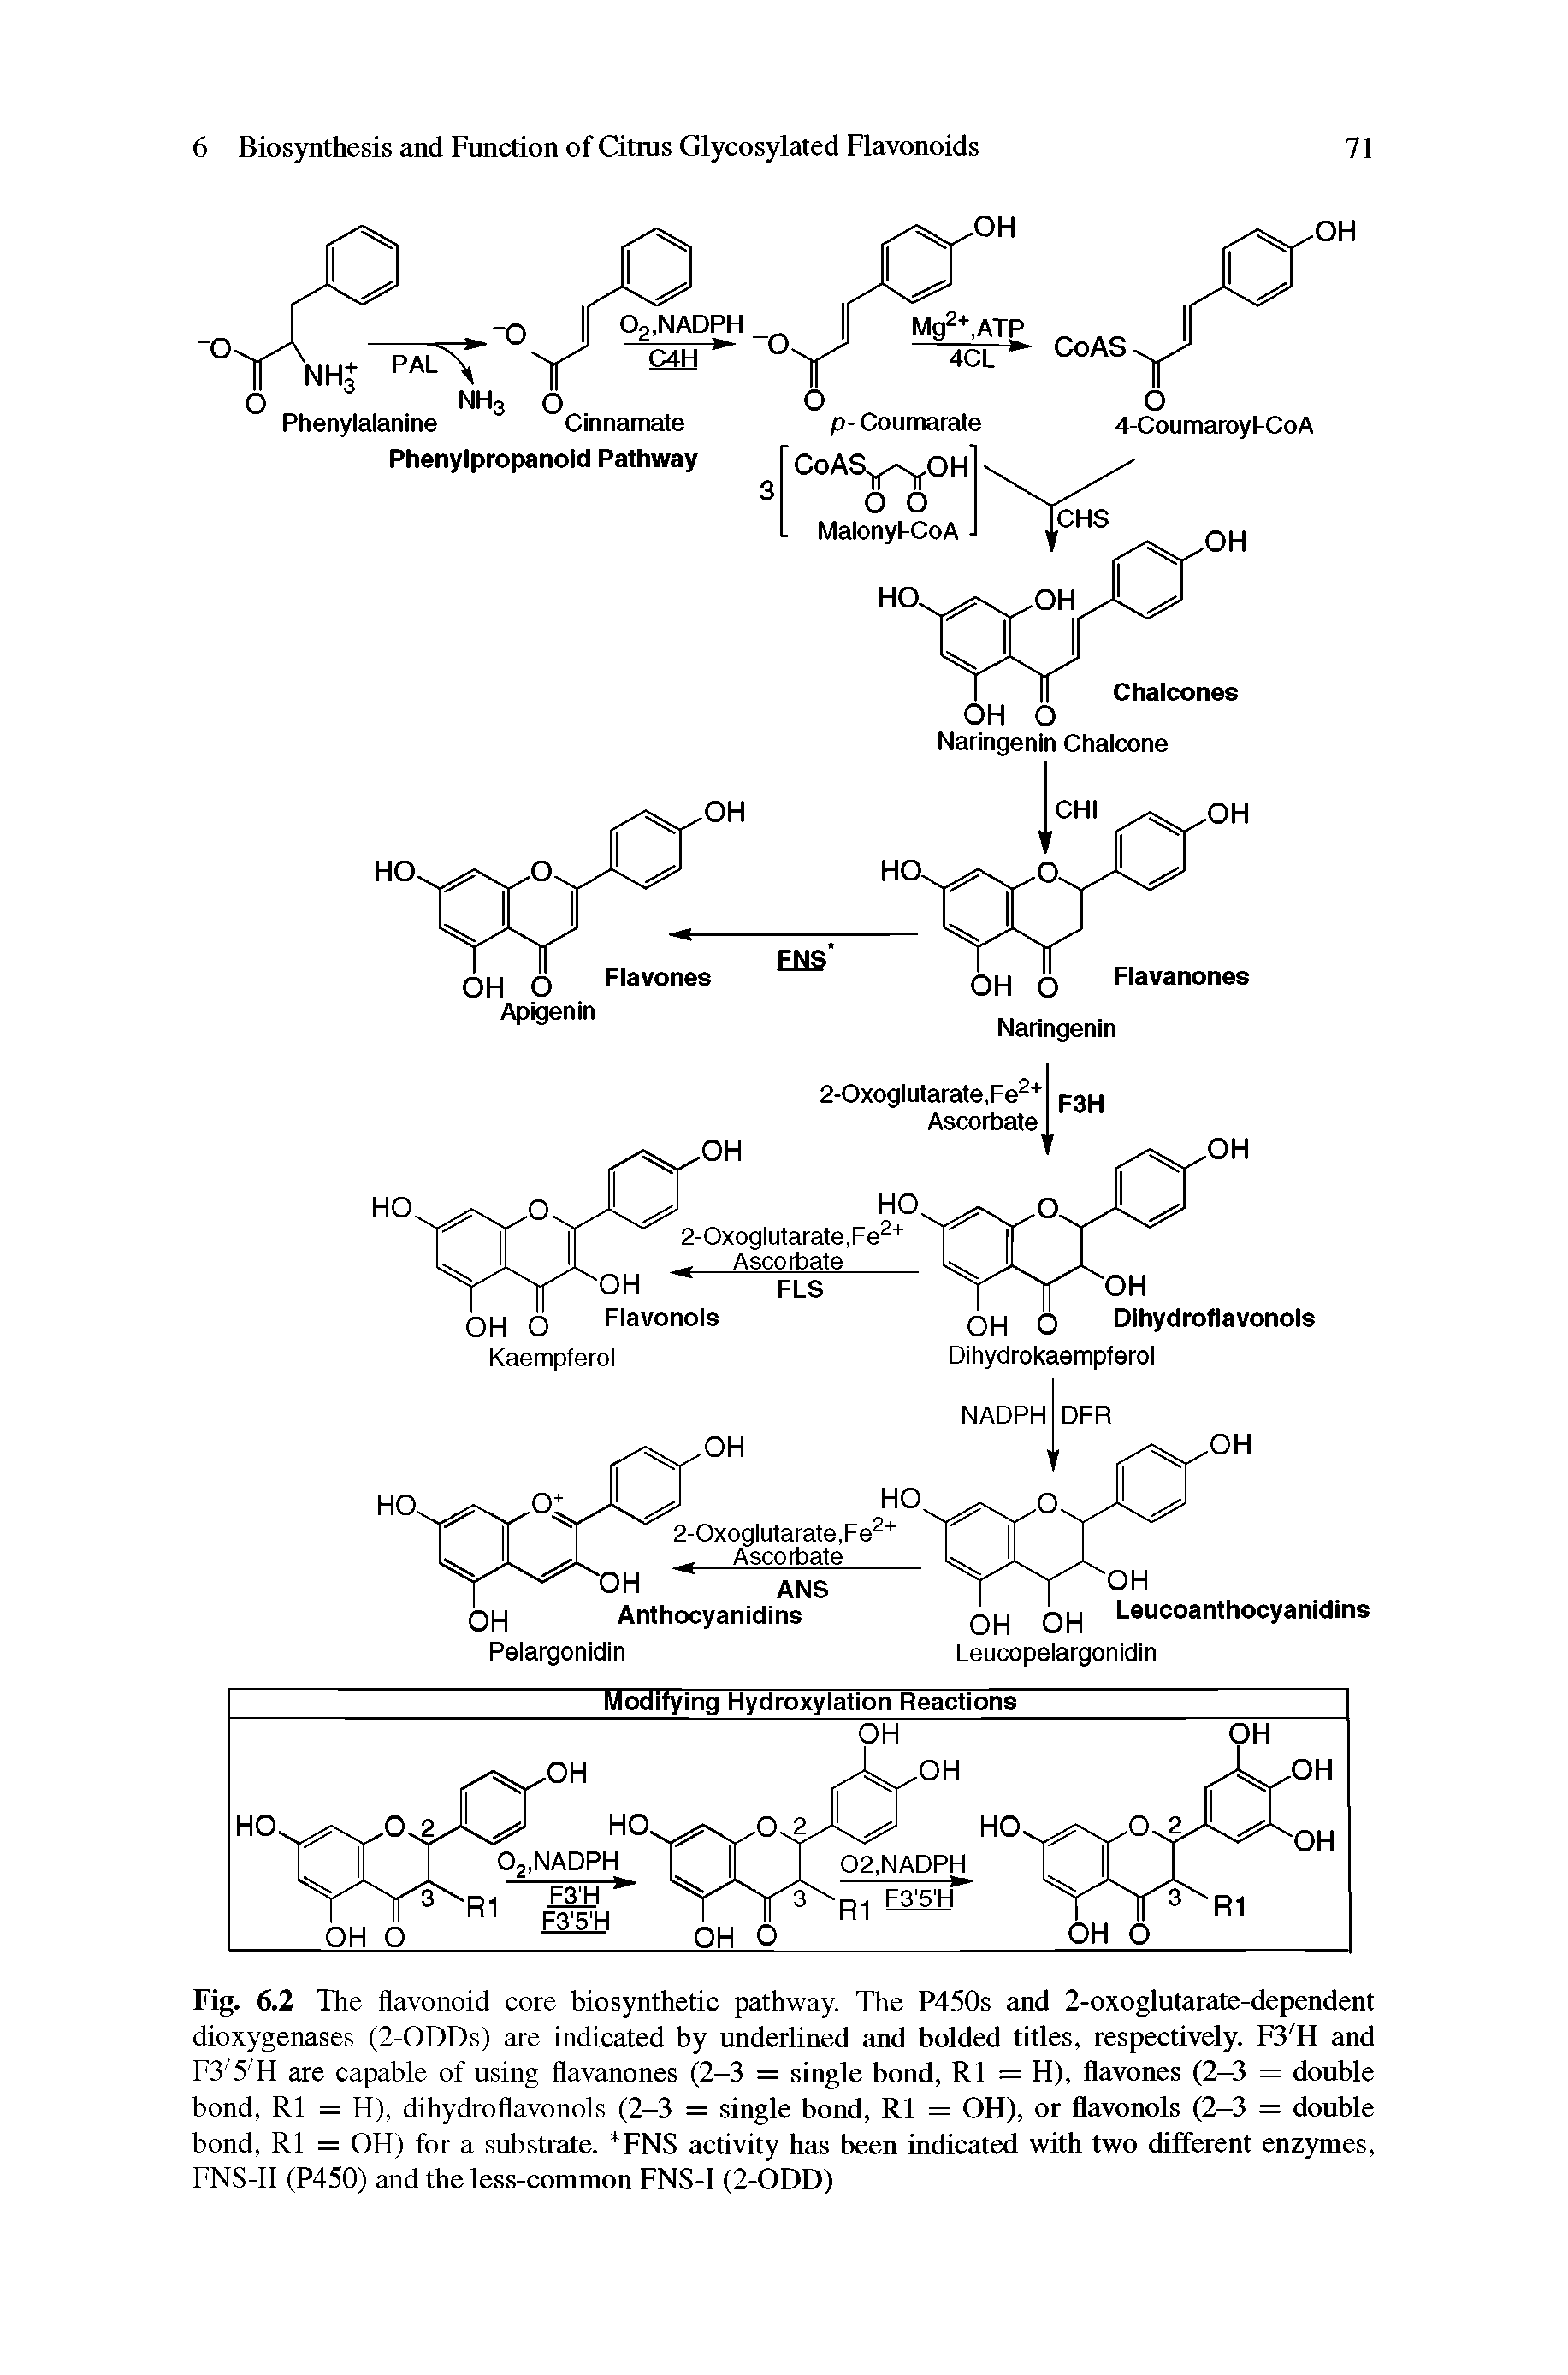 Fig. 6.2 The flavonoid core biosynthetic pathway. The P450s and 2-oxoglutarate-dependent dioxygenases (2-ODDs) are indicated by underlined and bolded titles, respectively. F3 H and F3 5 H are capable of using flavanones (2-3 = single bond, R1 = H), flavones (2-3 = double bond, R1 = H), dihydroflavonols (2-3 = single bond, R1 = OH), or flavonols (2-3 = double bond, R1 = OH) for a substrate. FNS activity has been indicated with two different enzymes, FNS-11 (P450) and the less-common FNS-I (2-ODD)...